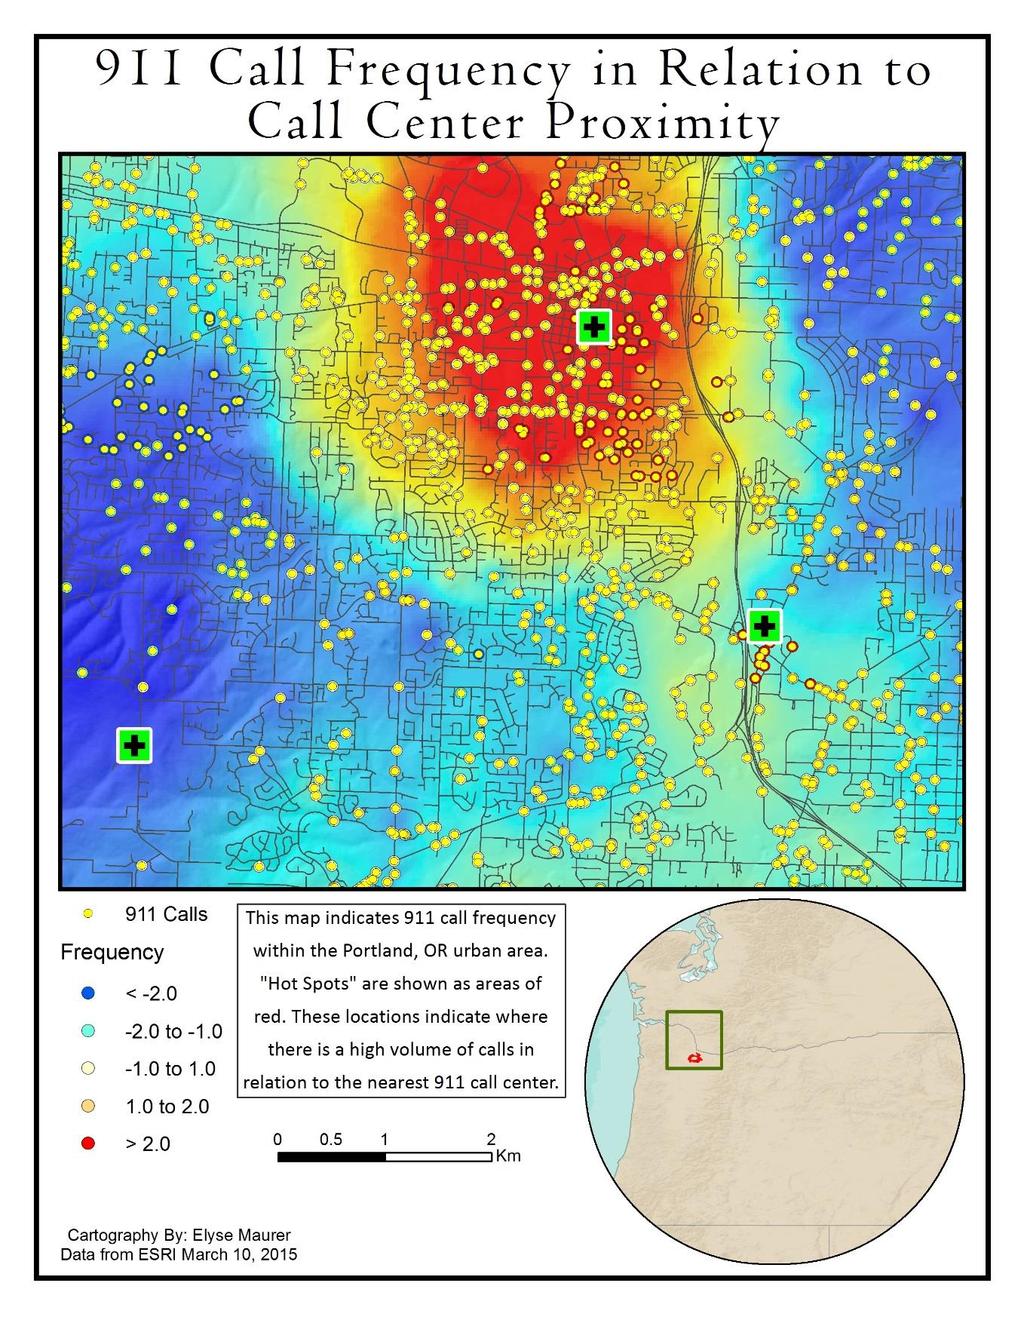 Figure 1. This map indicates the initial hot spot analysis for the Portland, OR urban area.